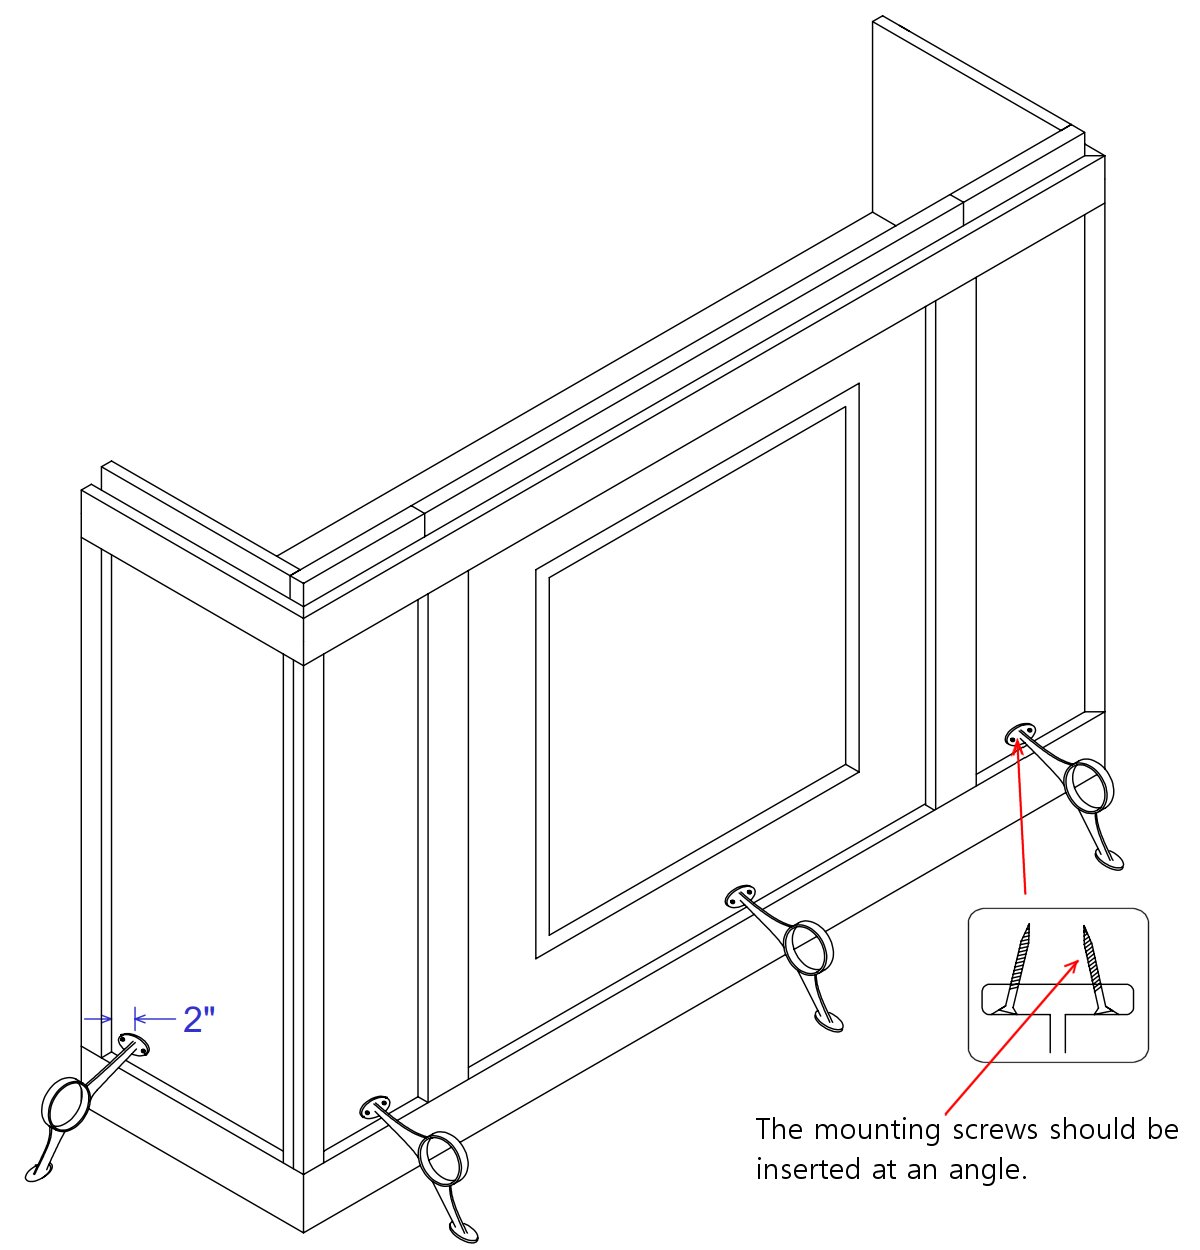 Assembly Drawing - Attach the Foot Rail Brackets